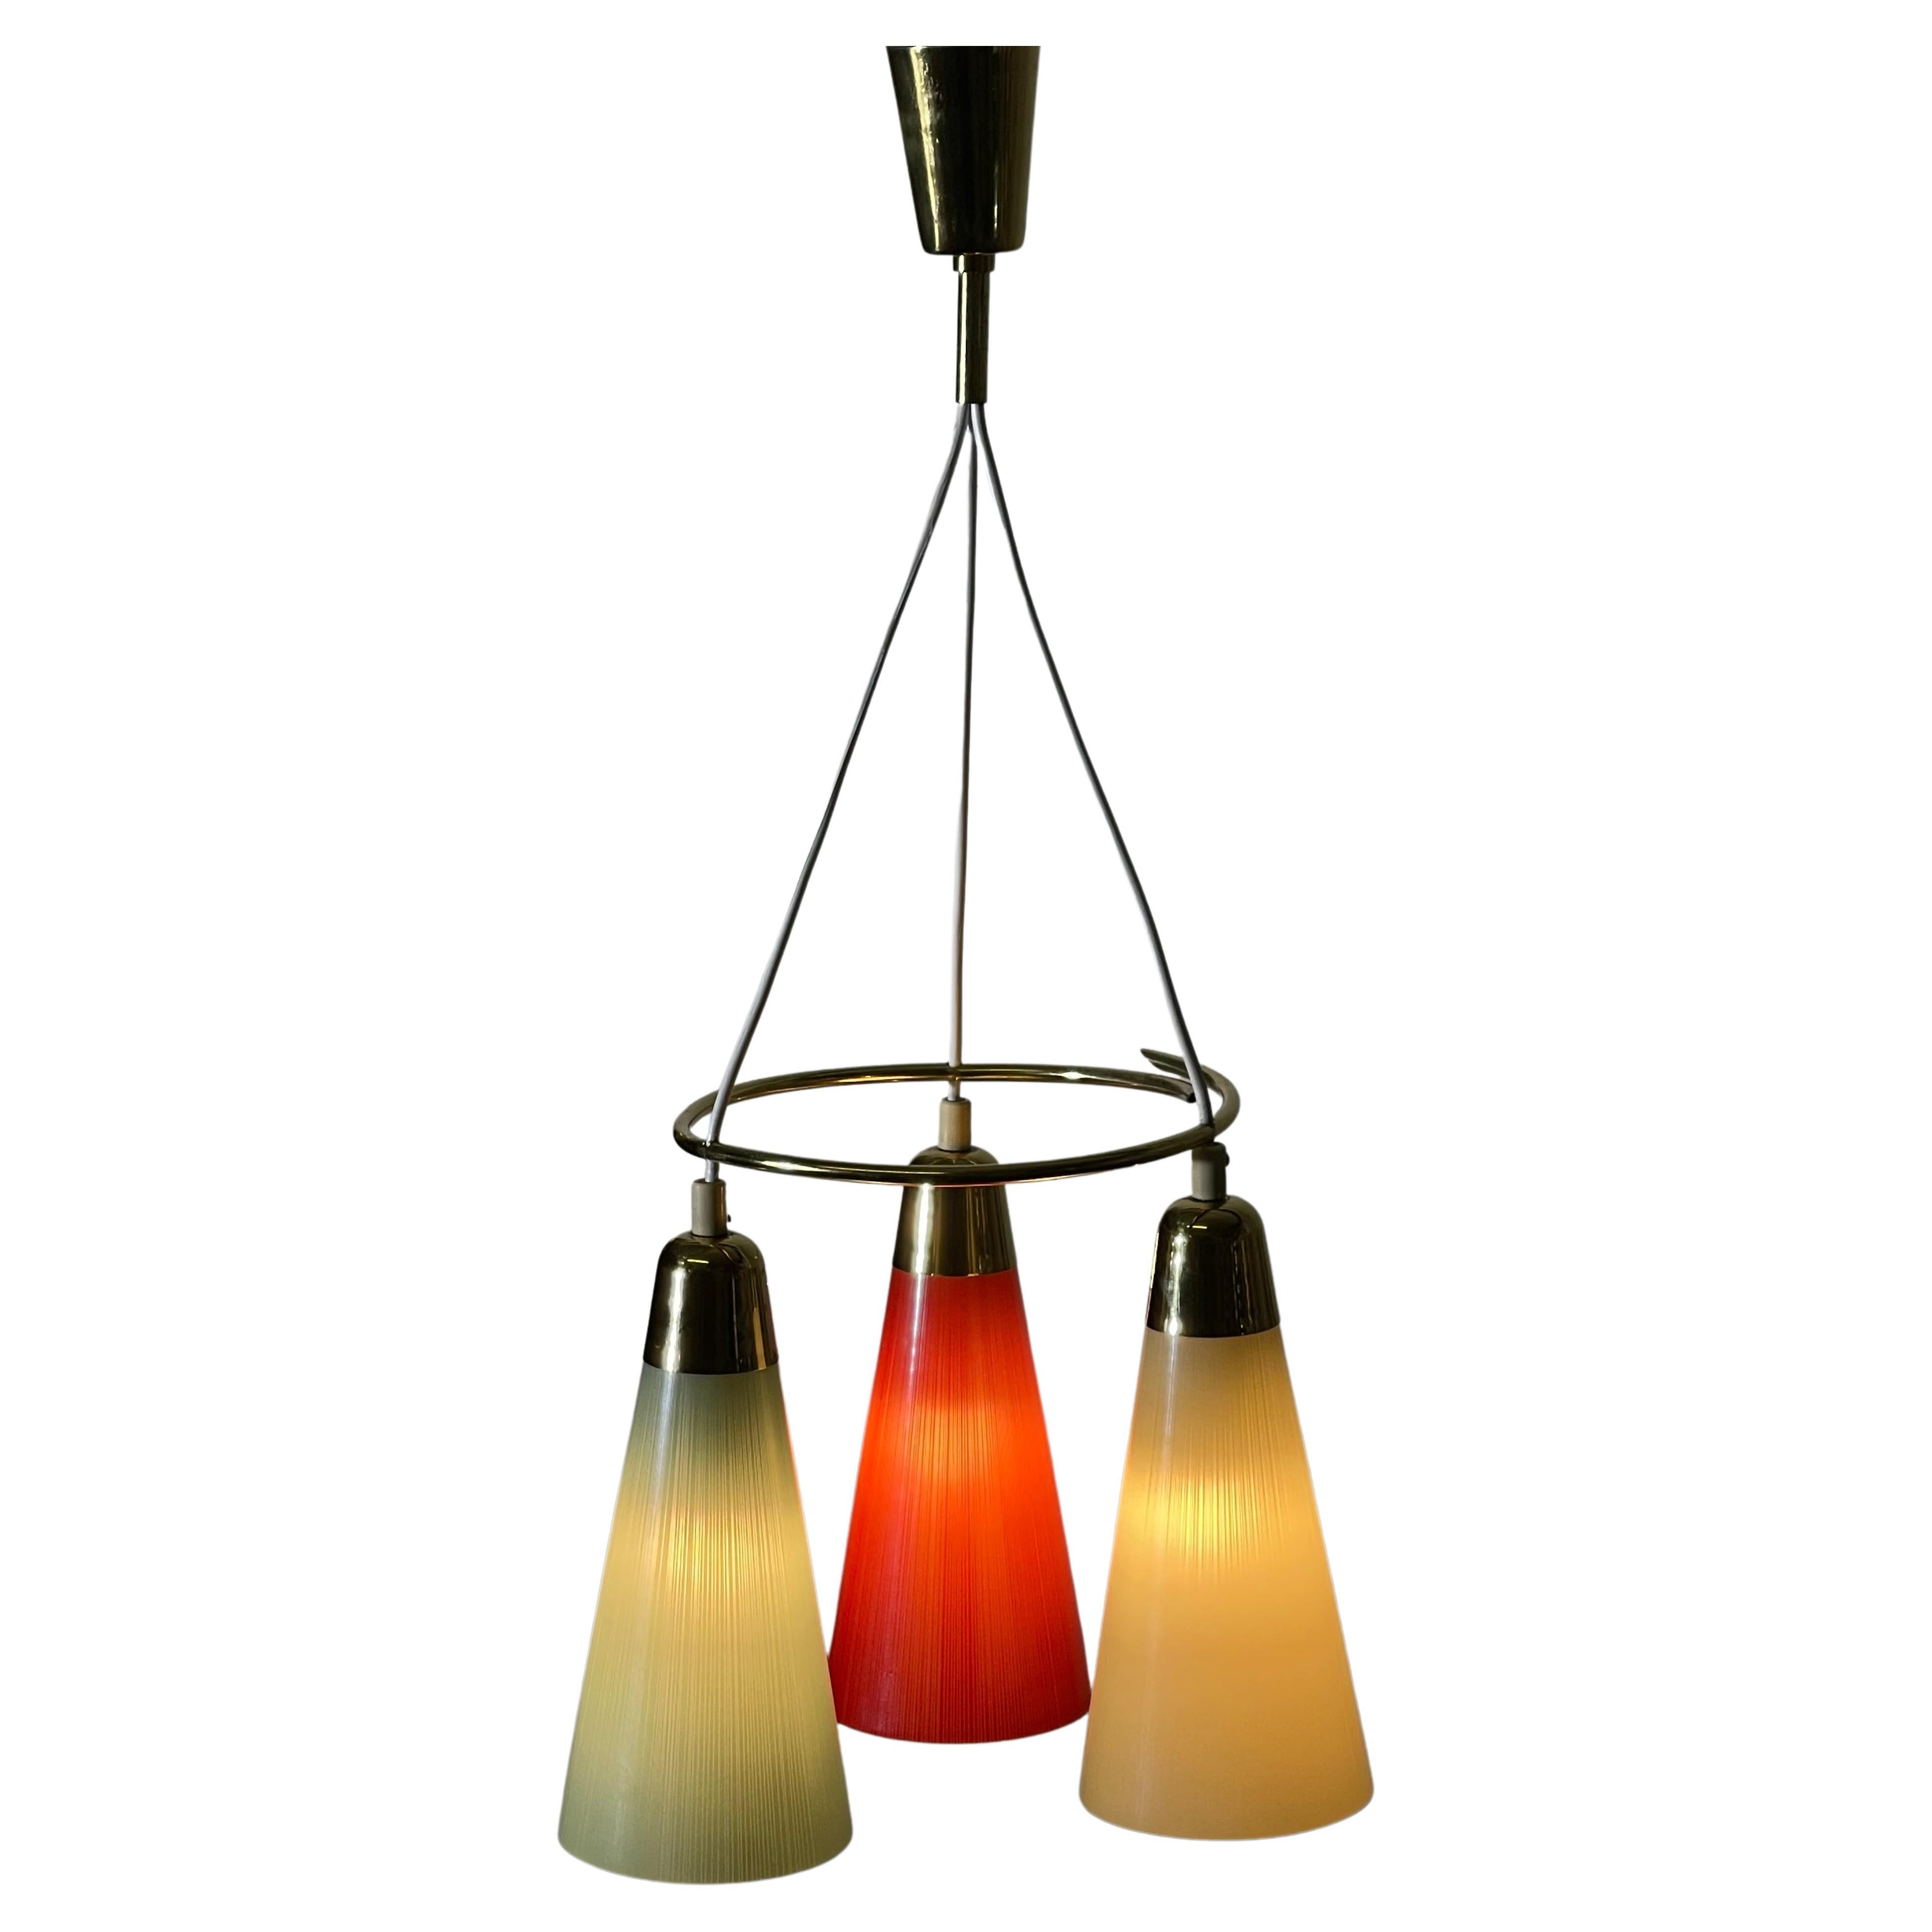 Stilnovo Style Polished Brass and Multicolor Glass Pendant, circa 1950s For Sale 7